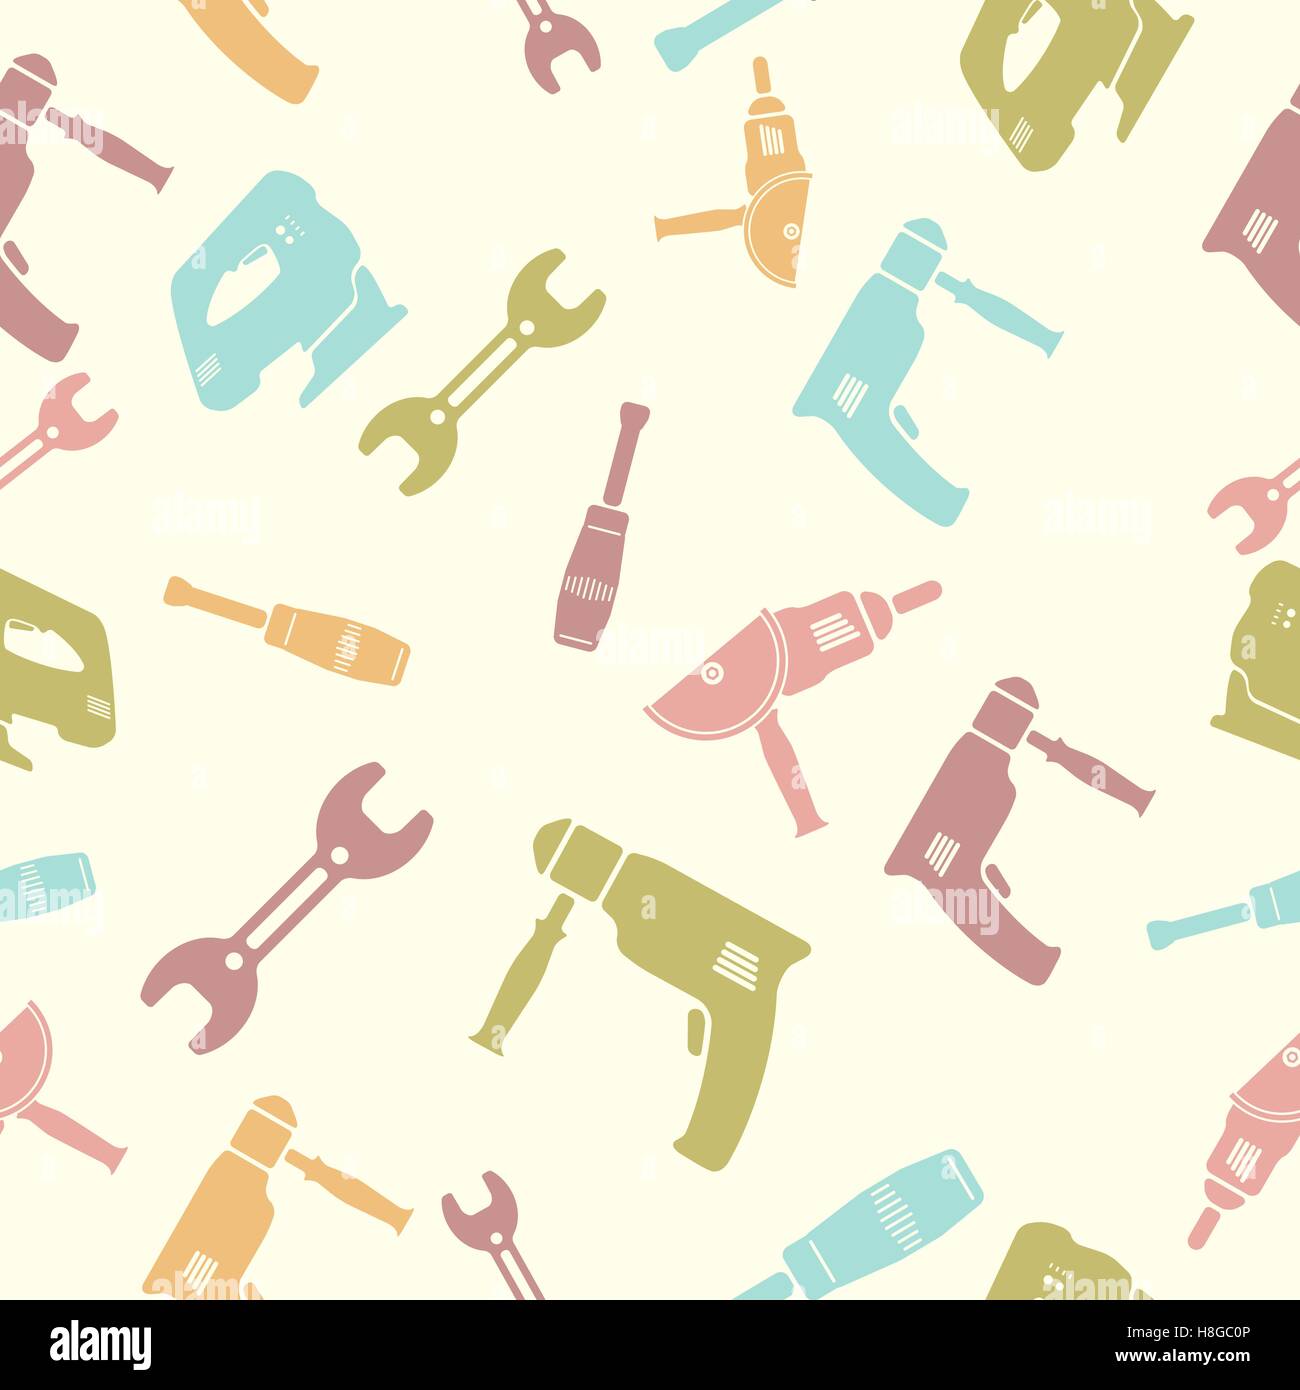 Vector illustration. Seamless pattern of Tools. Eps 10 Stock Vector